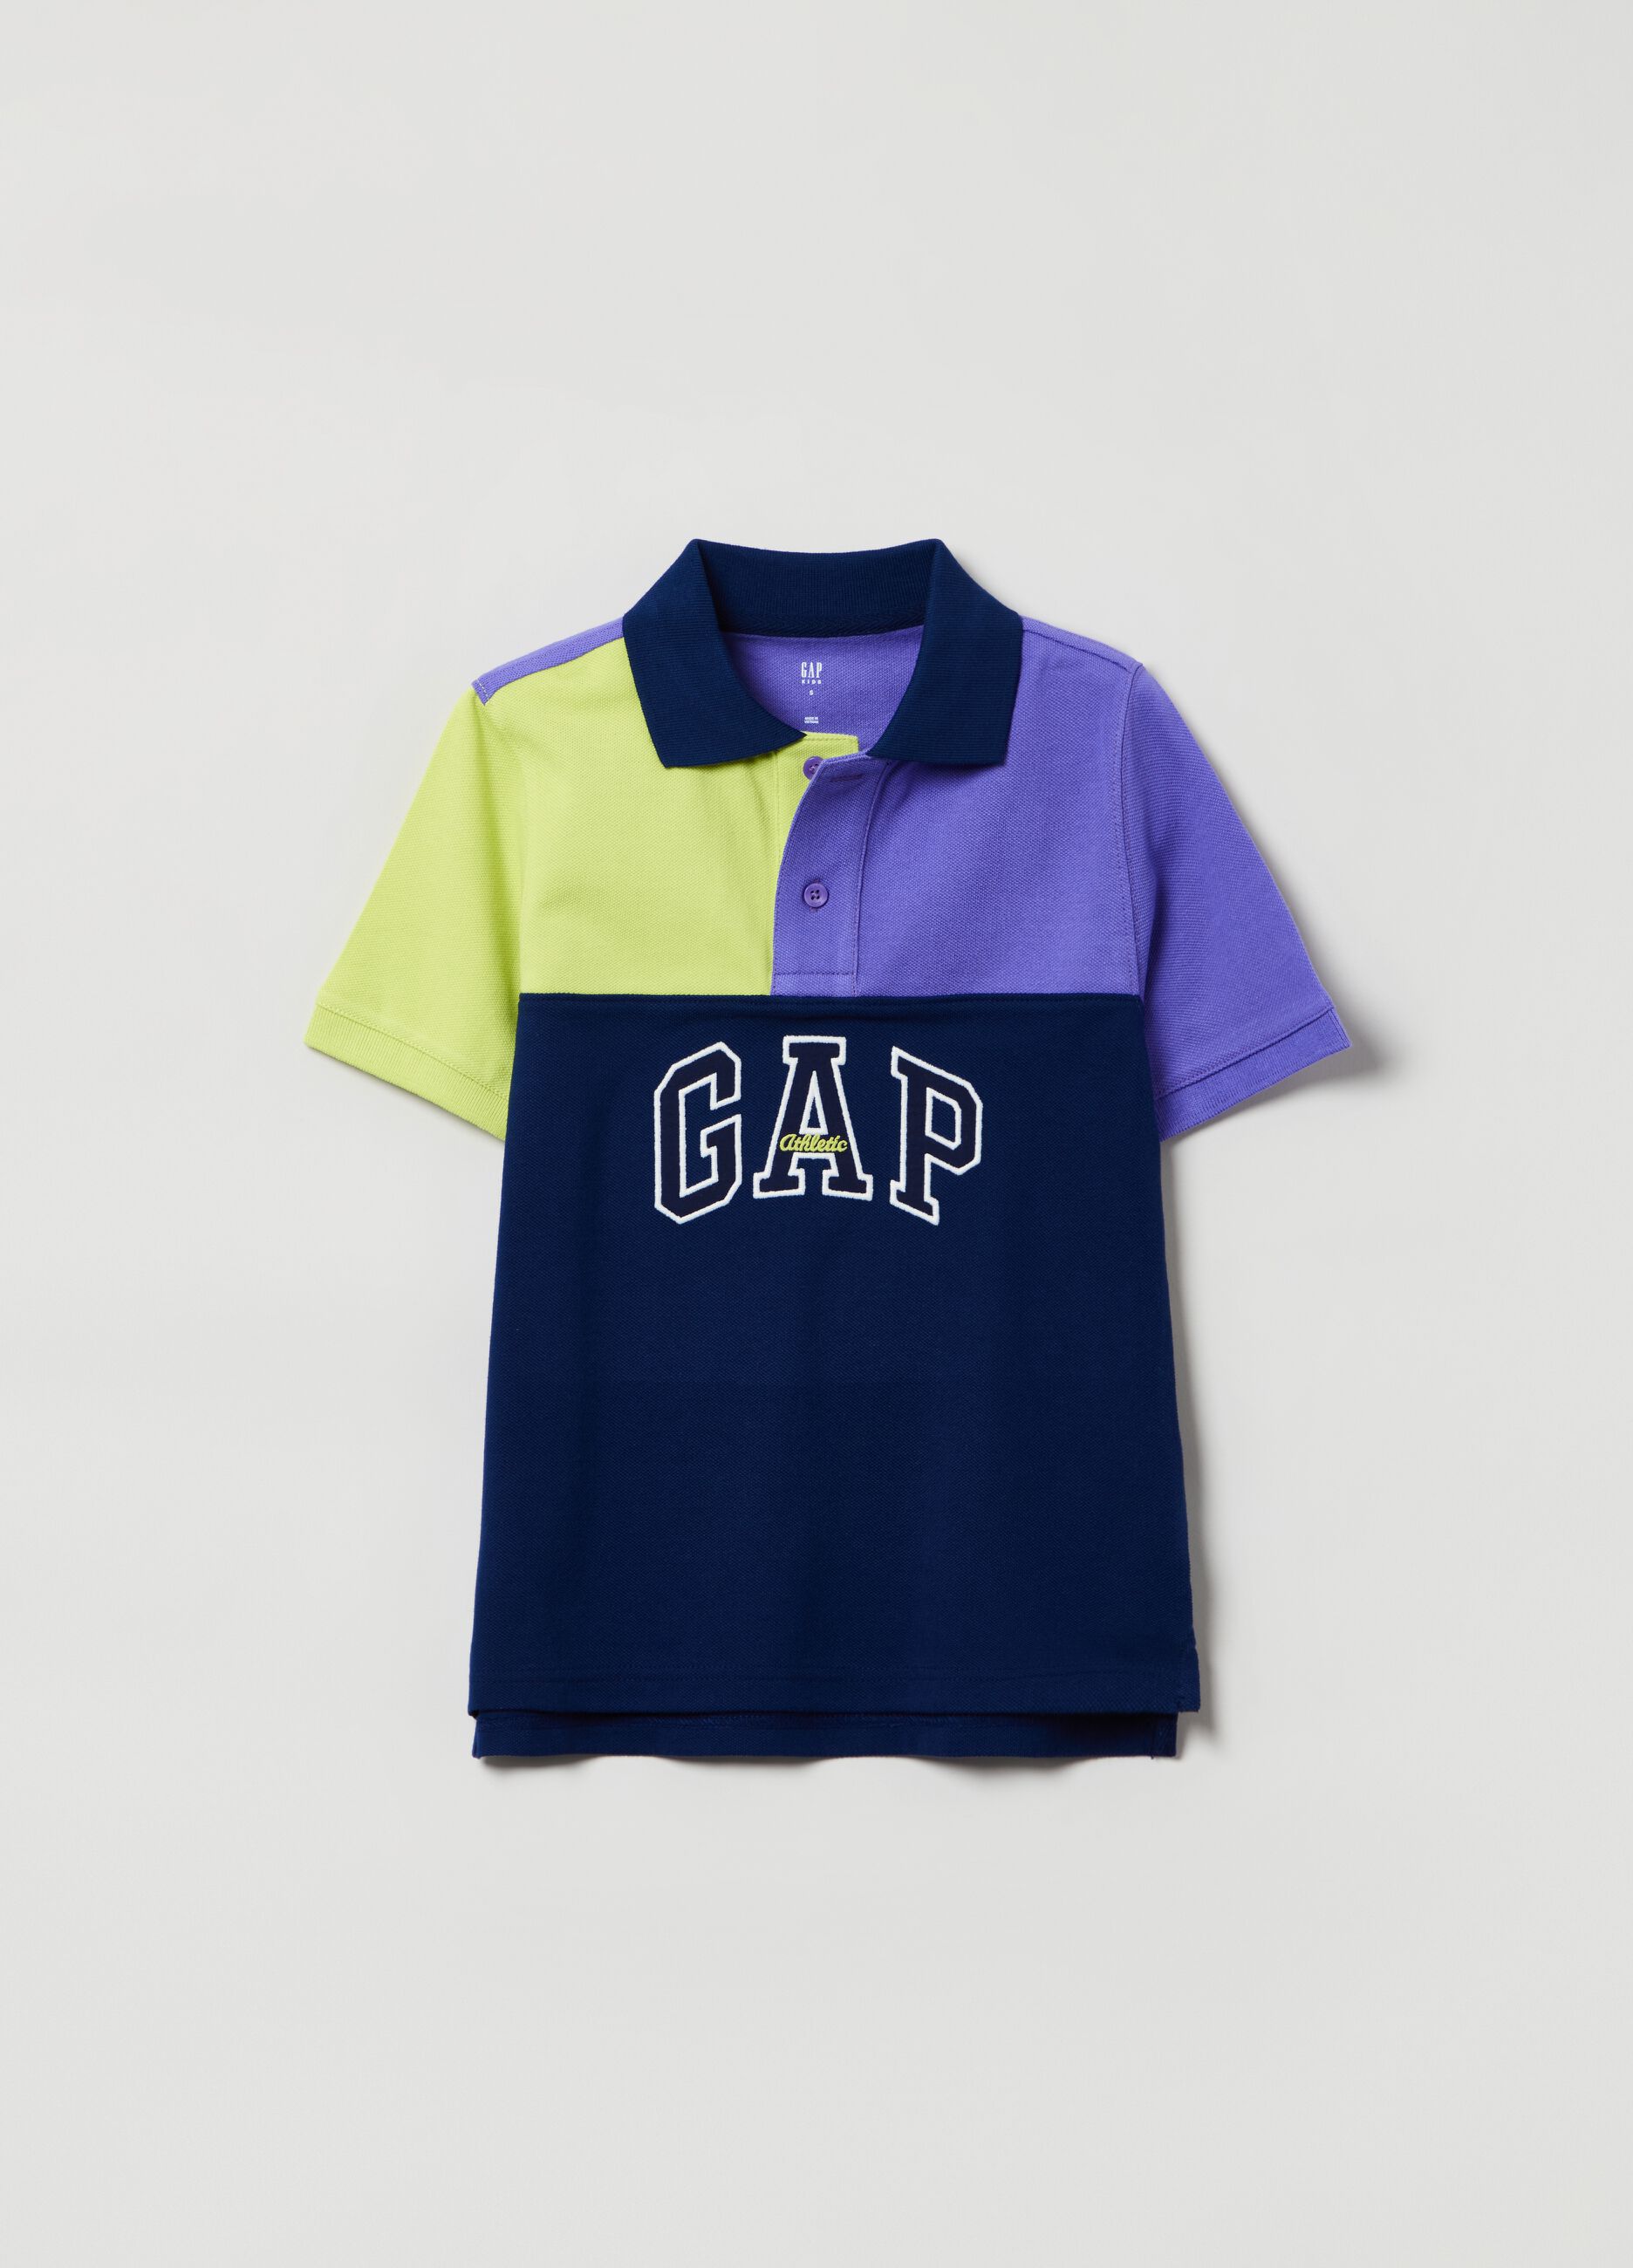 Colour block polo shirt with embroidered Athletic logo